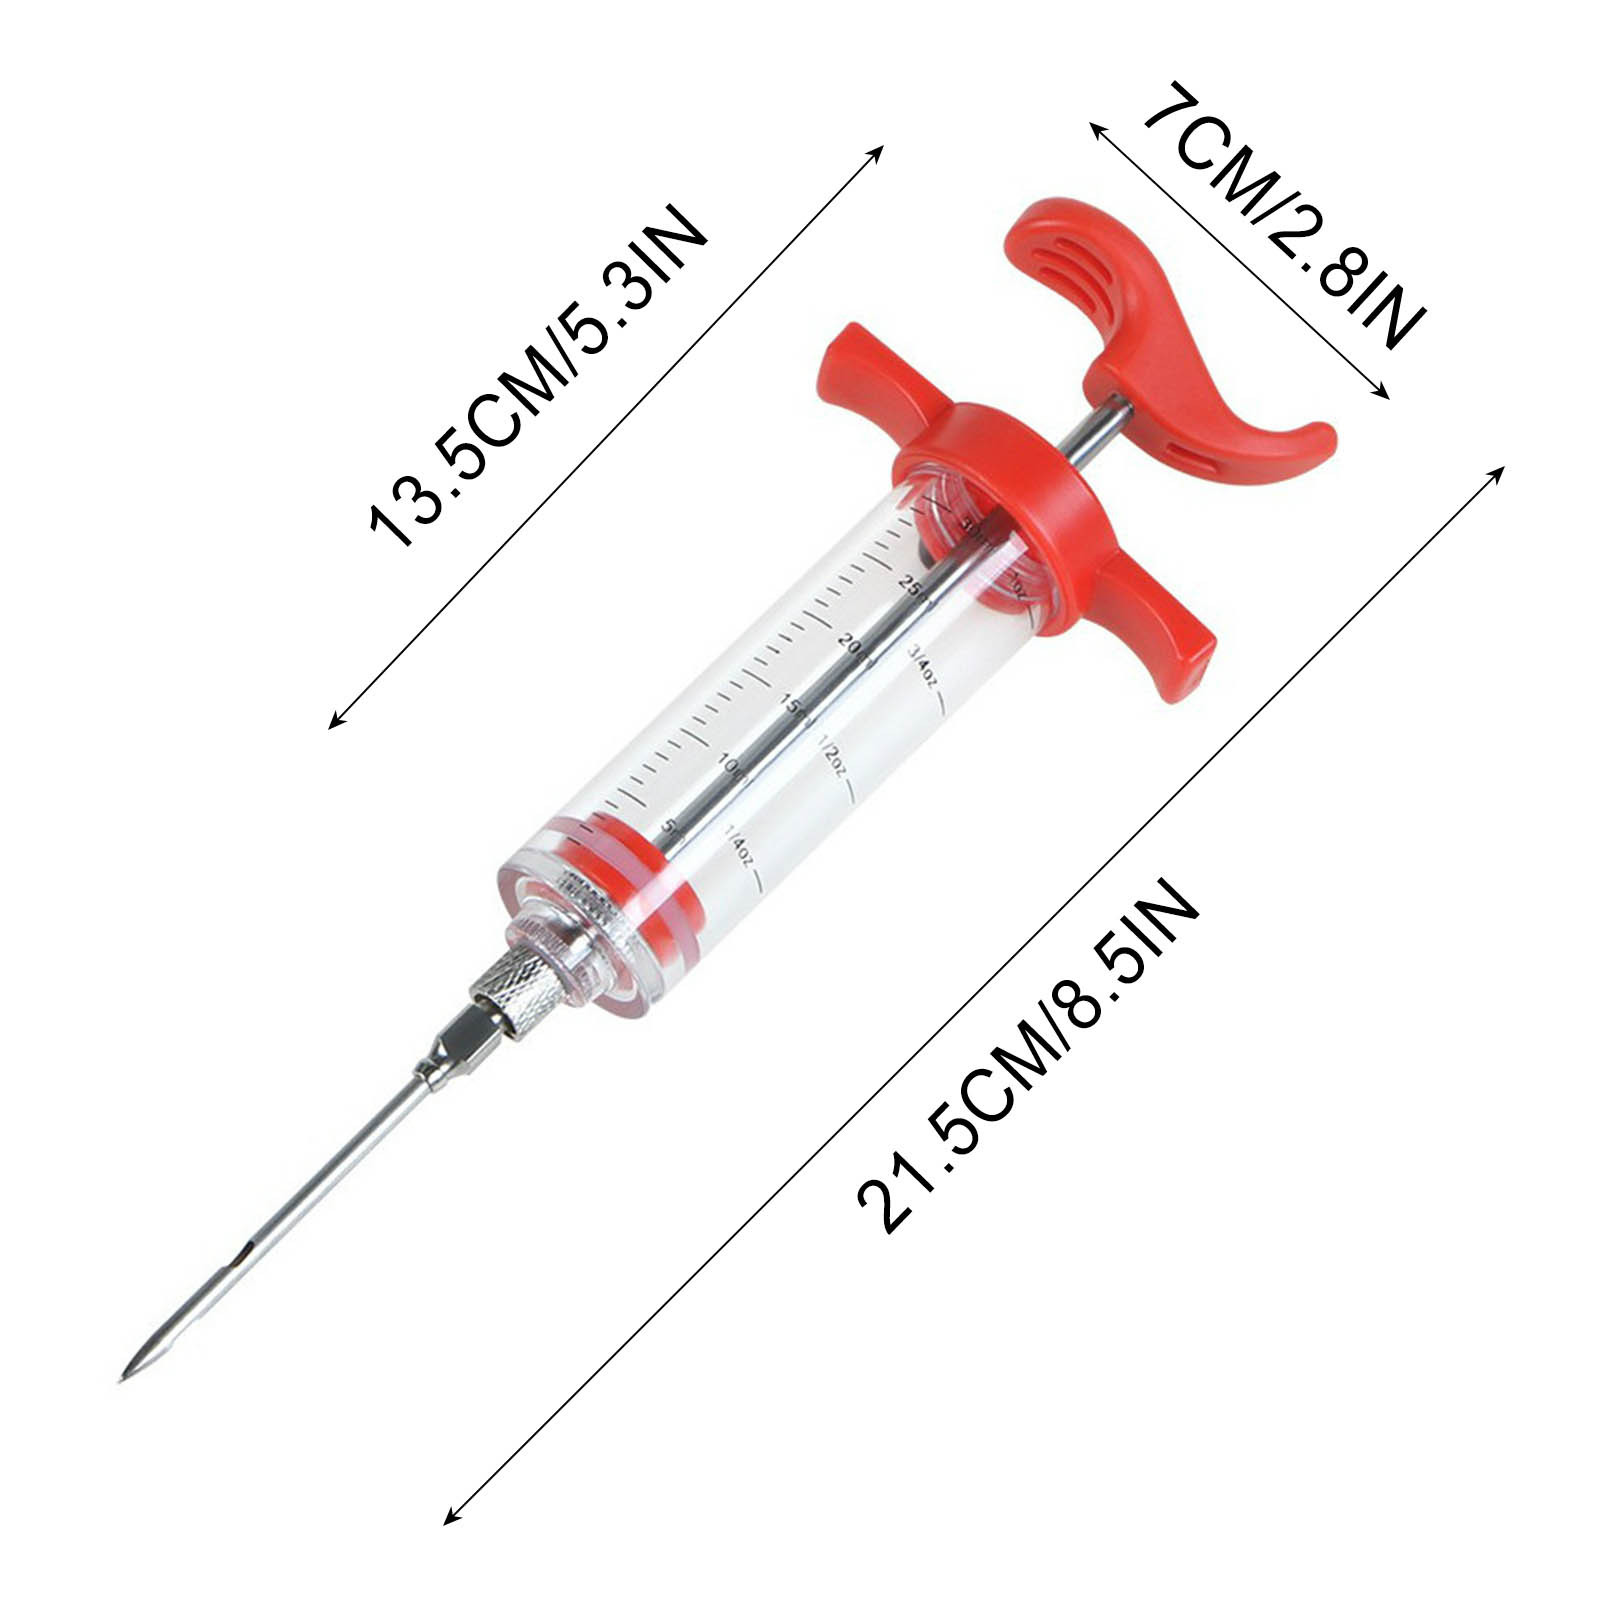 Herrnalise Stainless Steel Meat Injector Syringe For BBQ Grill Professional-Smoker Seasoning Culinary Barbecue Syringe Barbecue Tool Kitchen Essentials for New Home - image 3 of 9